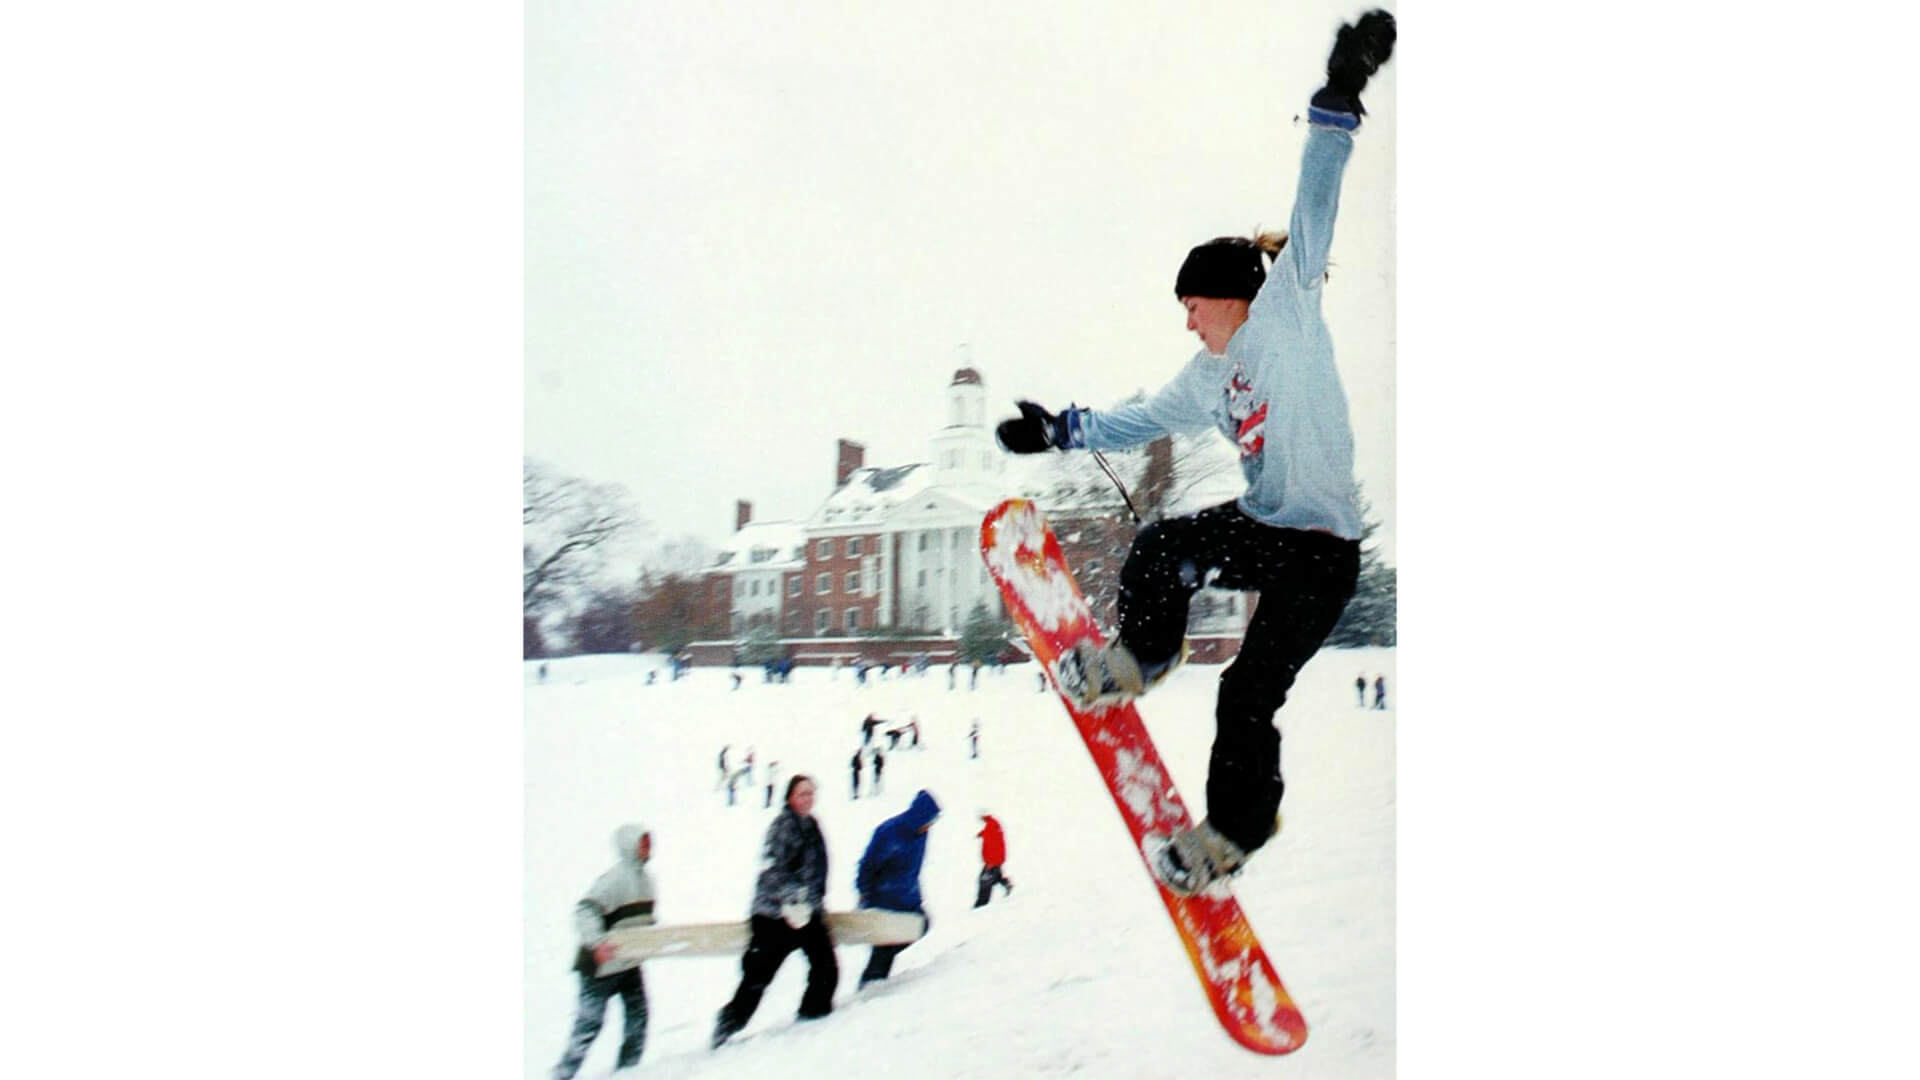 Student snowboarding on campus in 2003